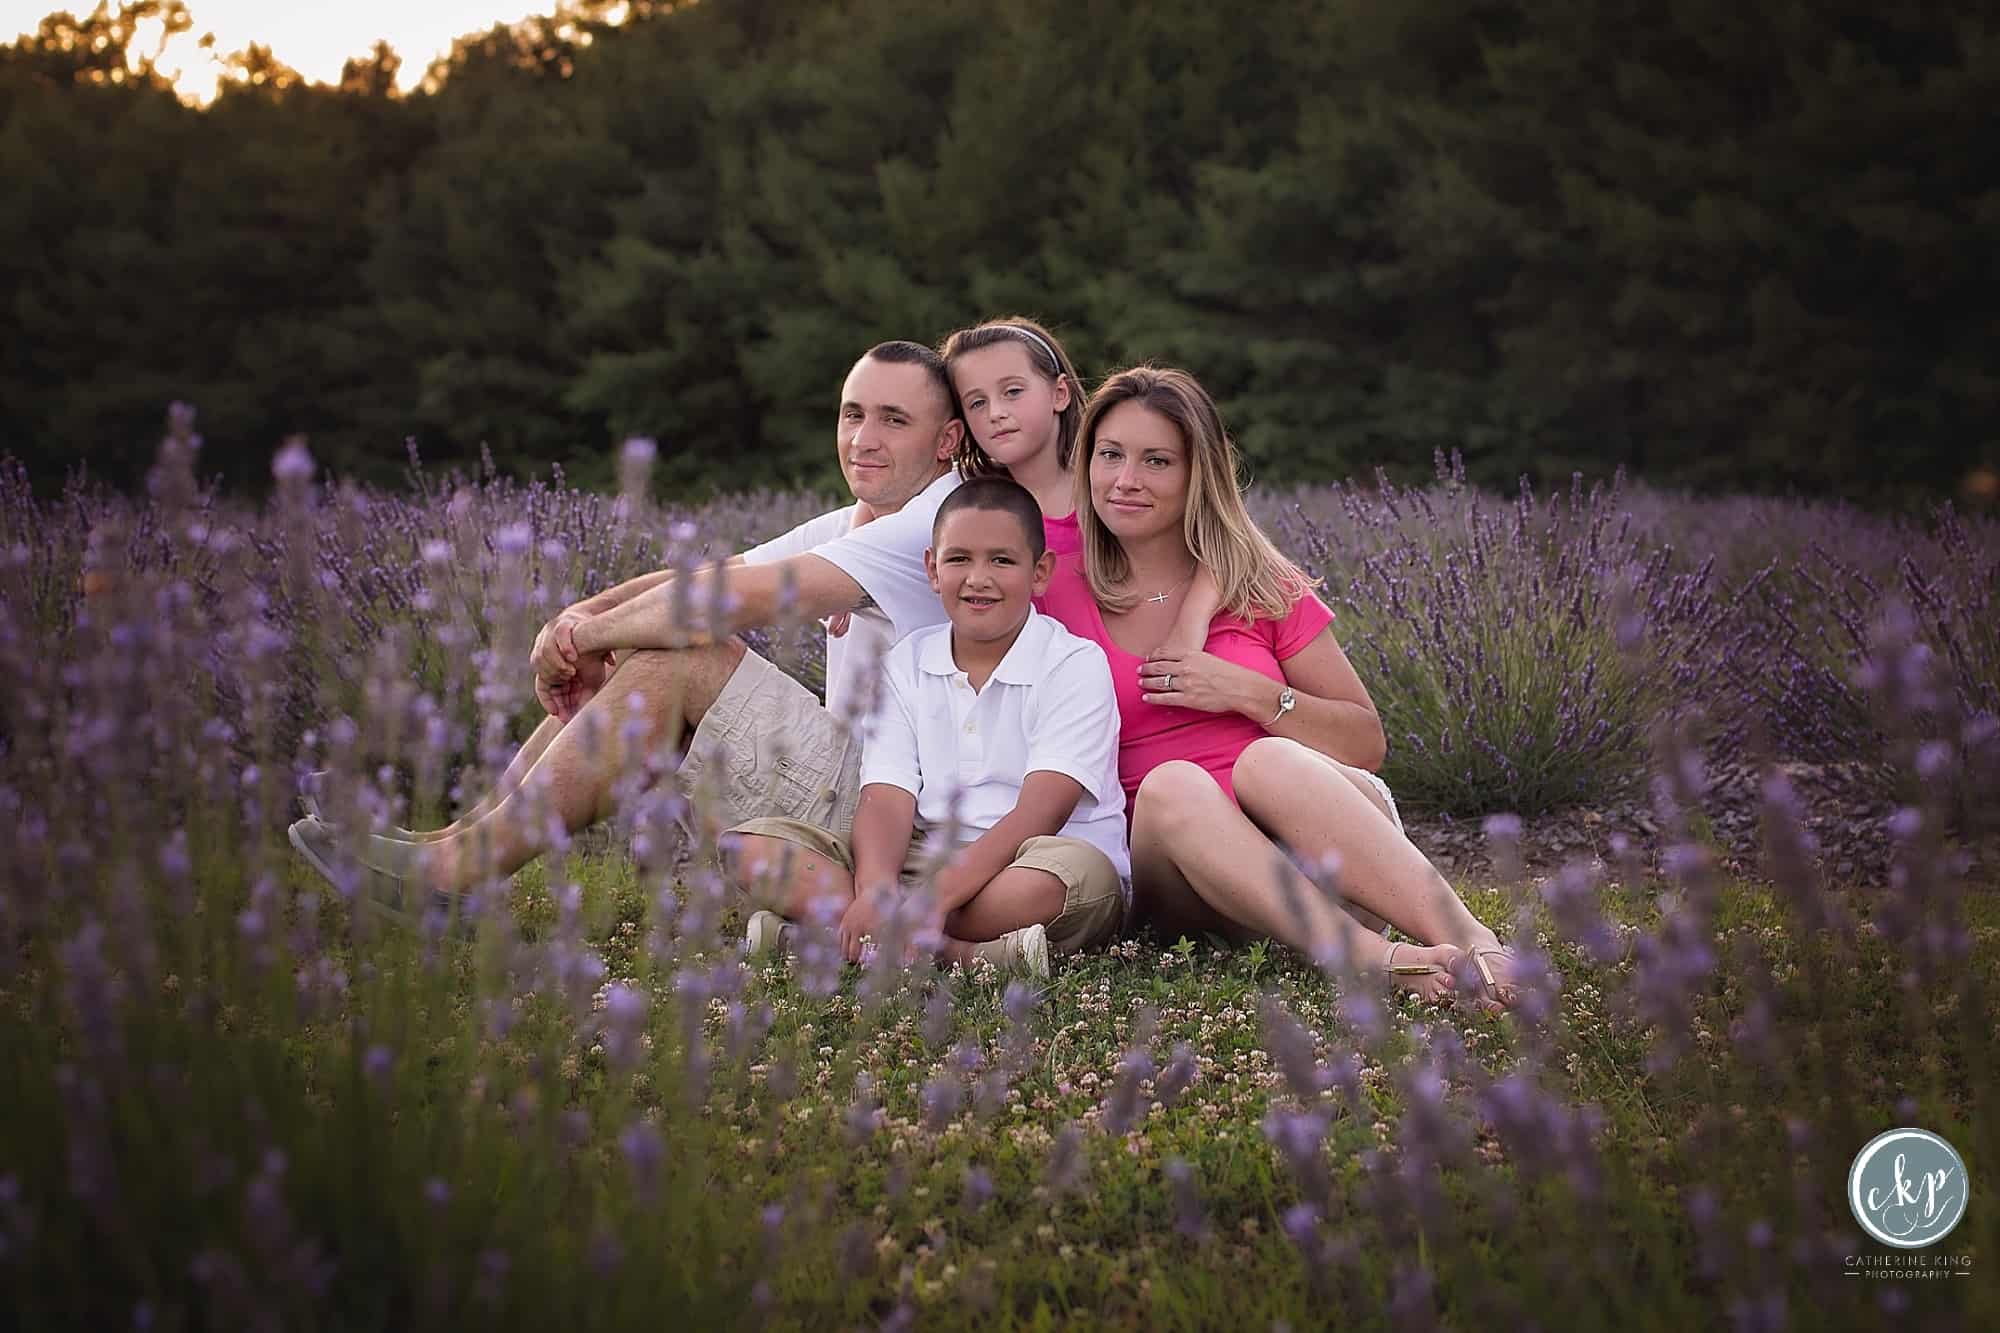 a beautiful summer evening photography sessions at lavender pond farm with a family of 4 expecting a baby with ct family photographer catherine king photographer